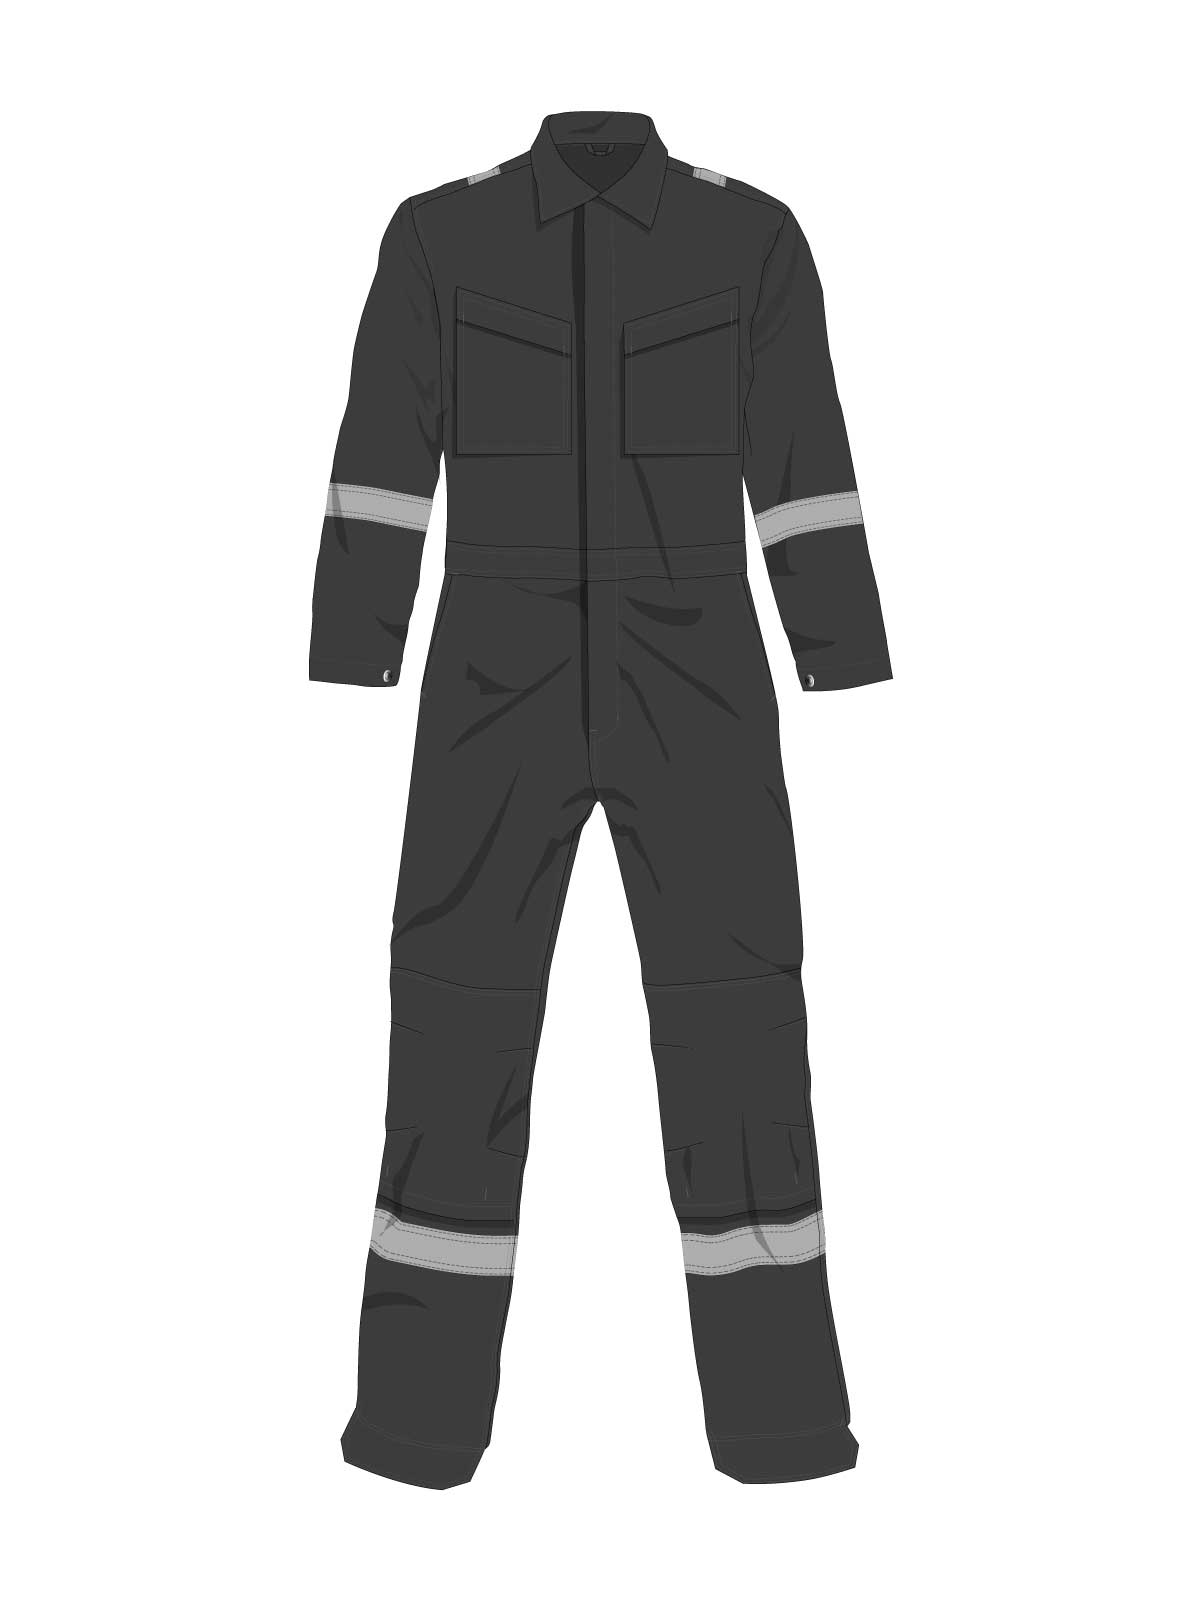 Kinetic Fire Resistant Coverall